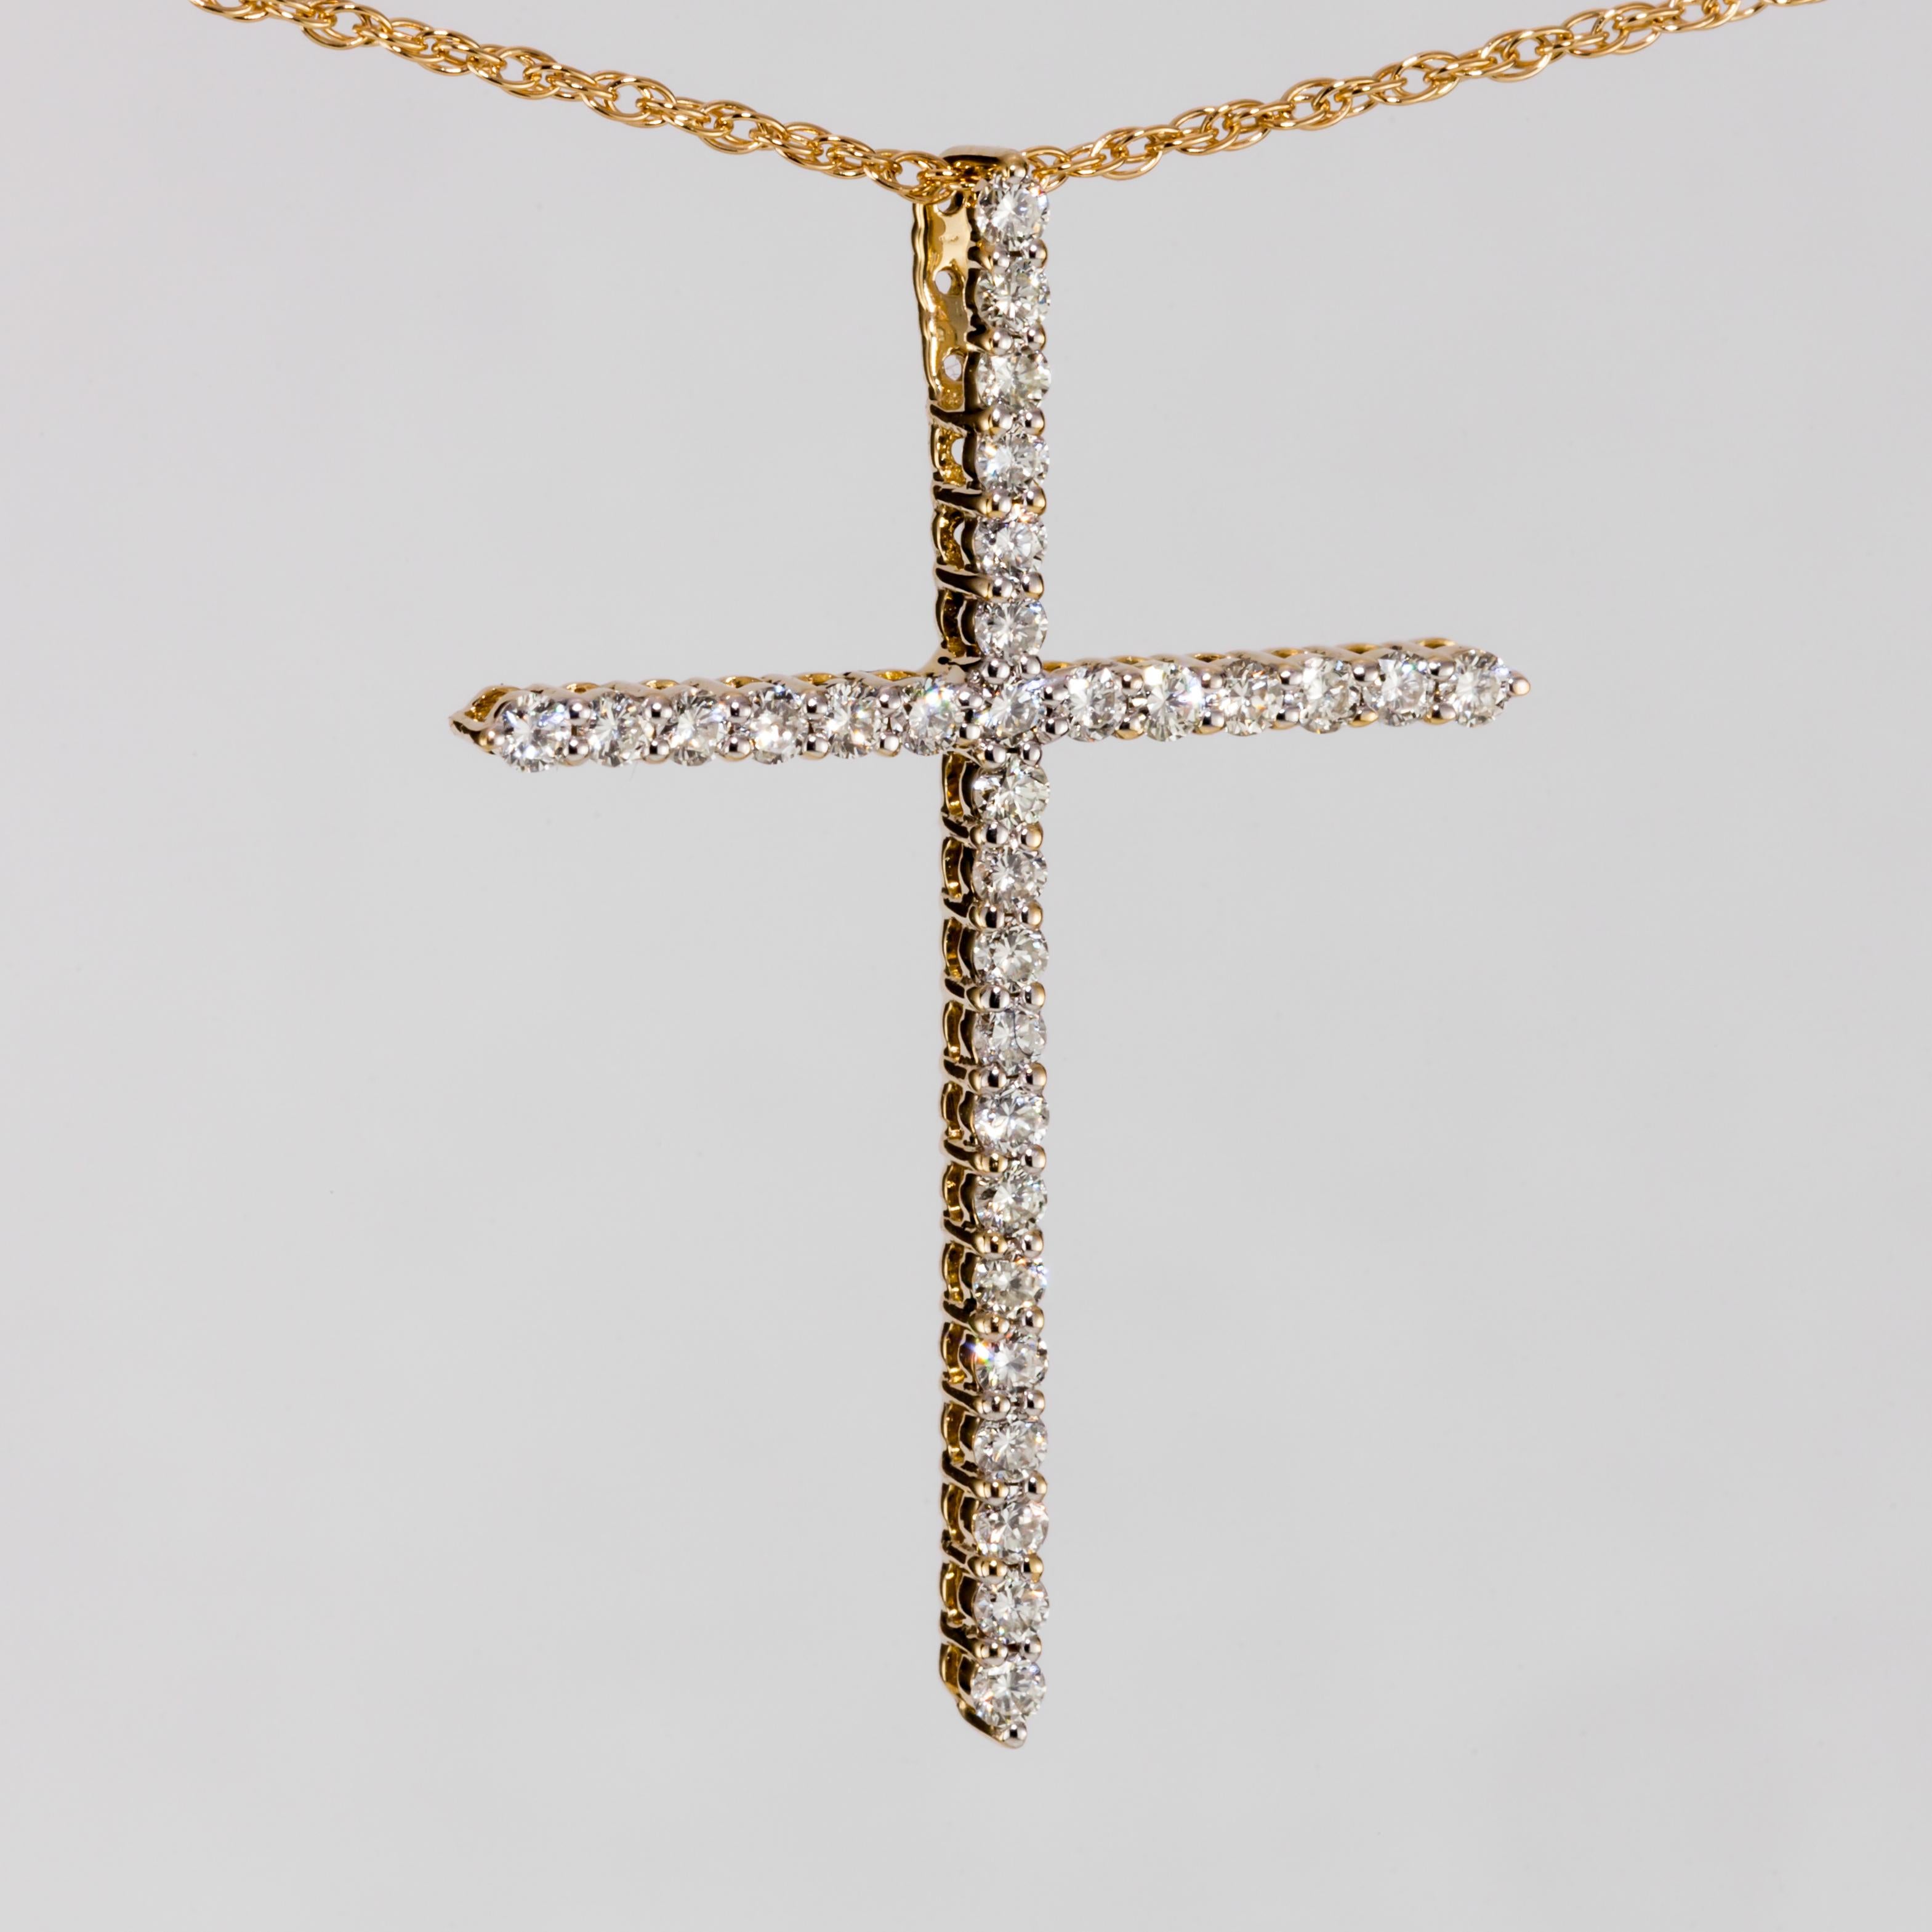 0.56 Carat Diamond Cross Pendant in Yellow Gold with Chain For Sale 5